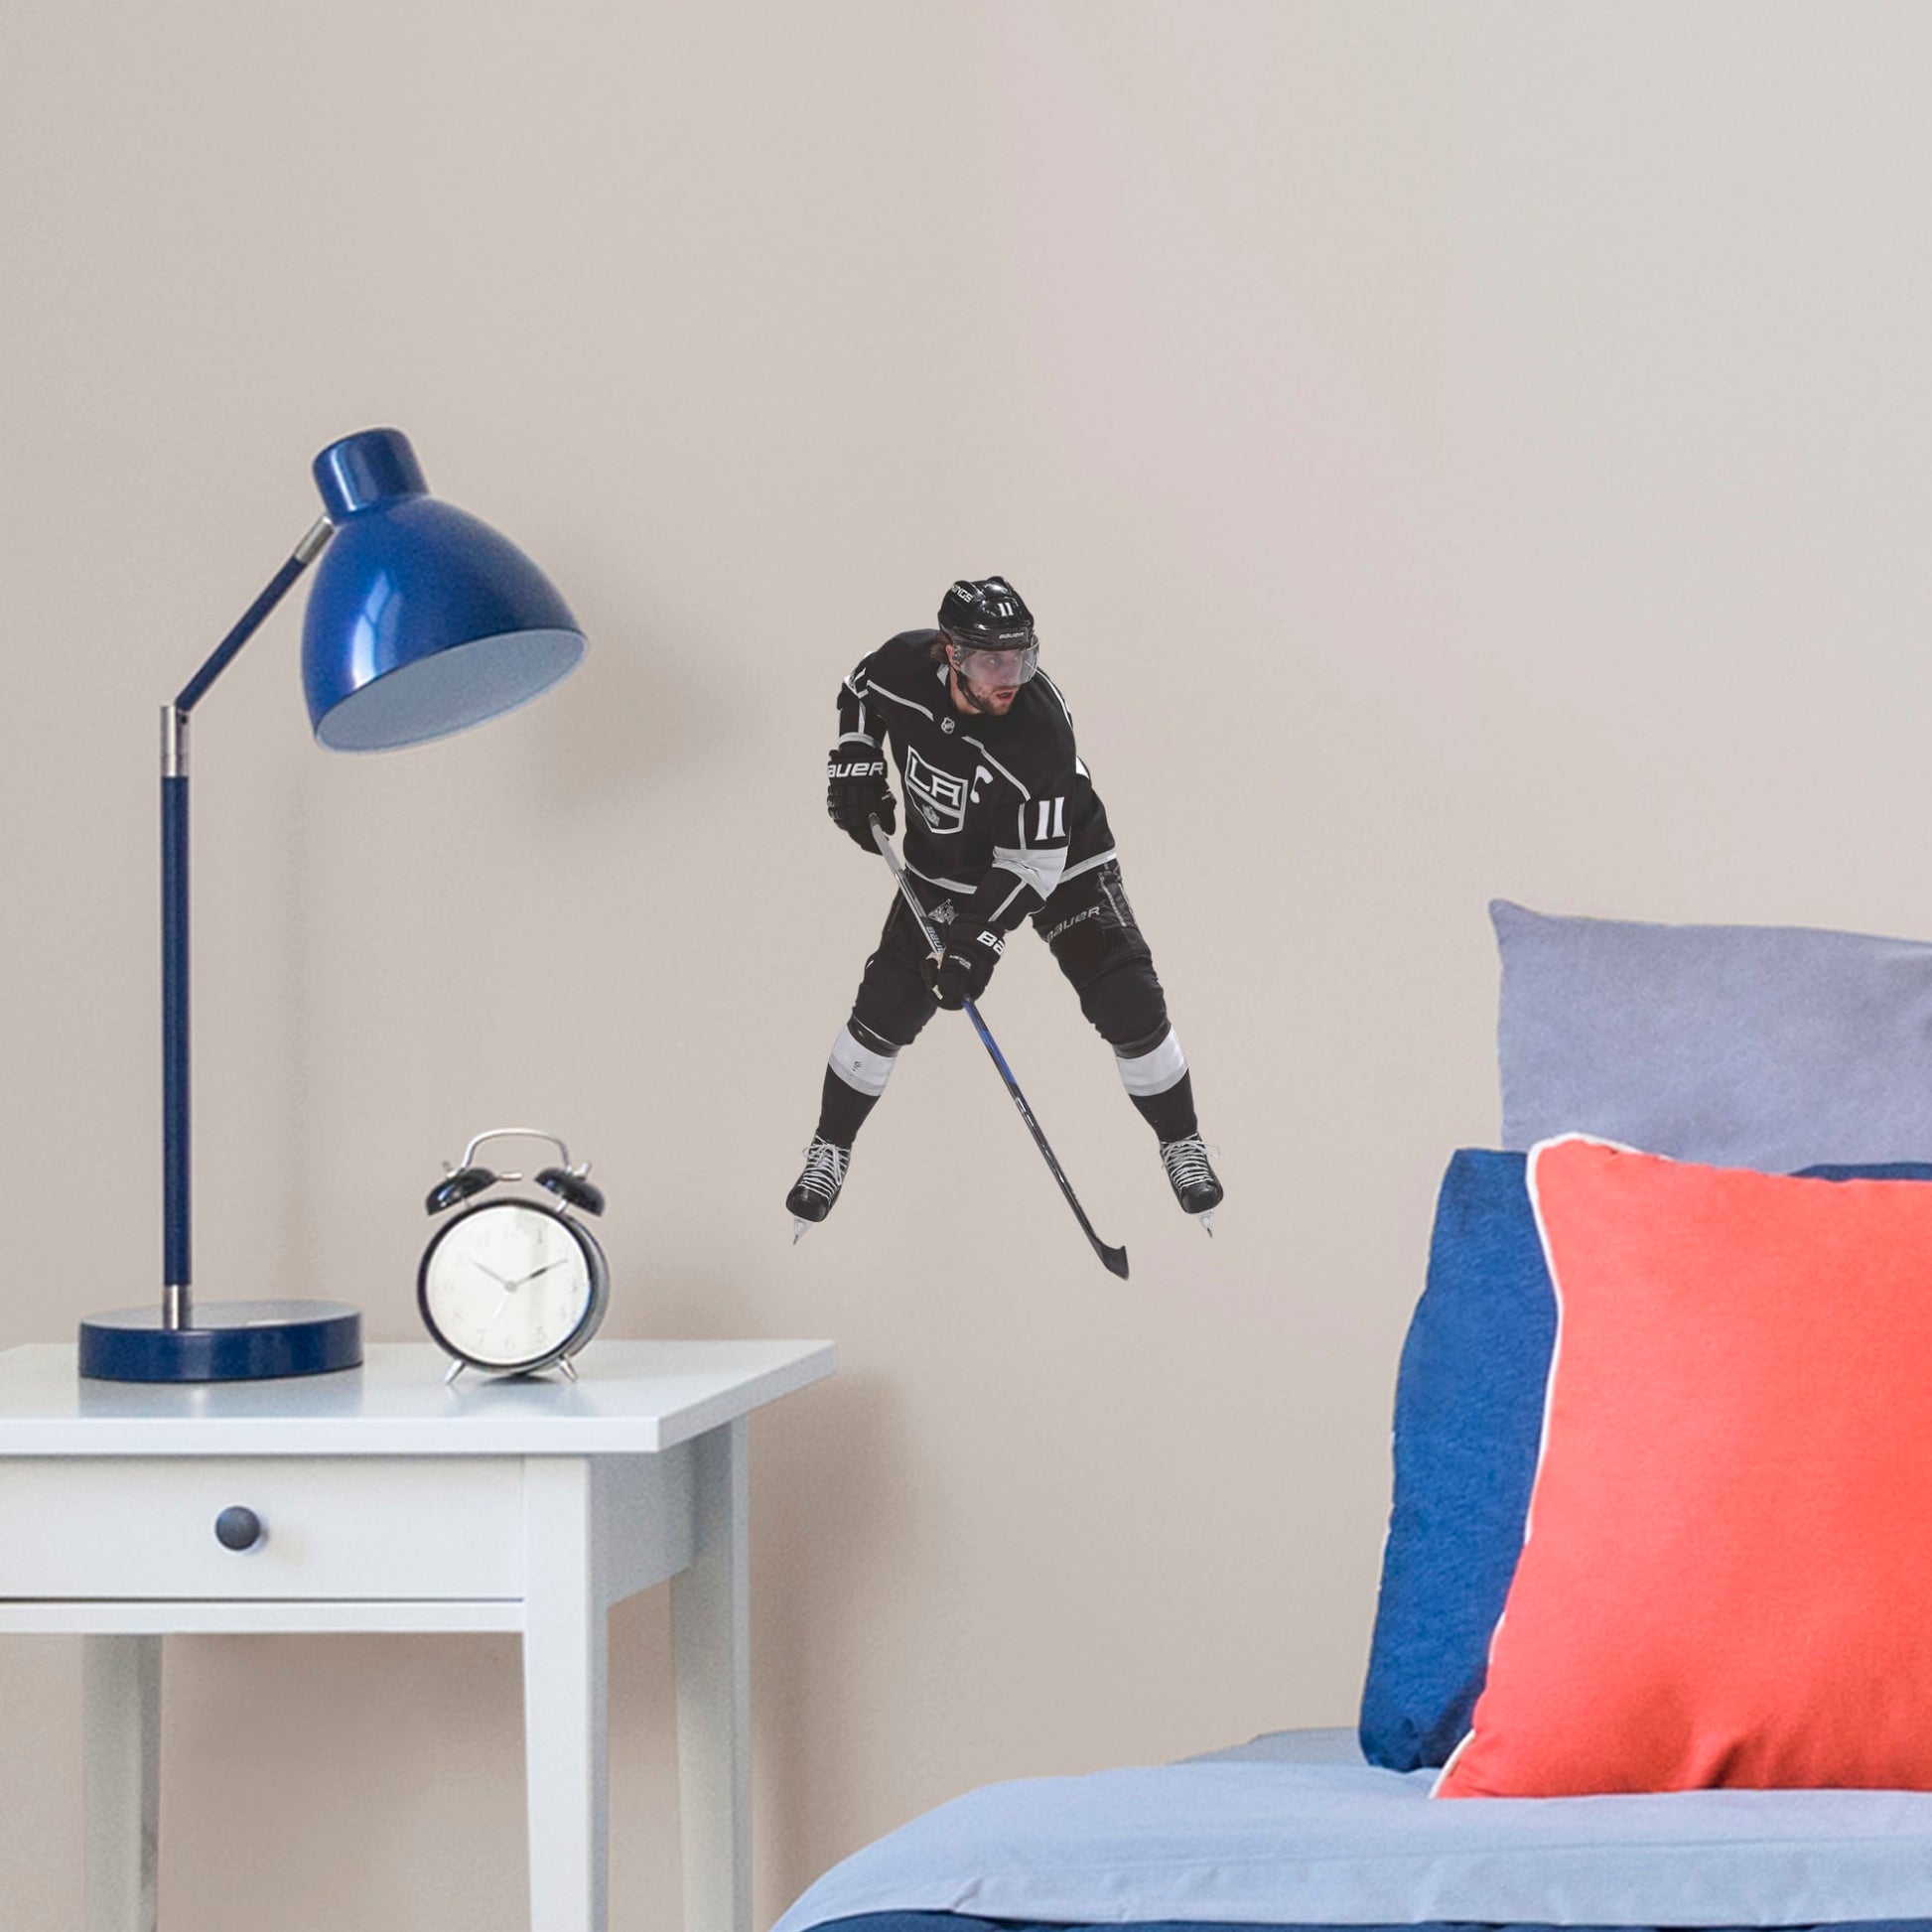 Life-Size Athlete + 12 Decals (46"W x 75"H) NHL fans and Kings fanatics alike love Anze Kopitar, the clutch captain from Los Angeles, and now you can bring his skill to life in your own home! Seen here in his home uniform in action on the ice, this durable, bold, and removable wall decal will make the perfect addition to your bedroom, office, fan room, or any spot in your house! Let's Go Kings!